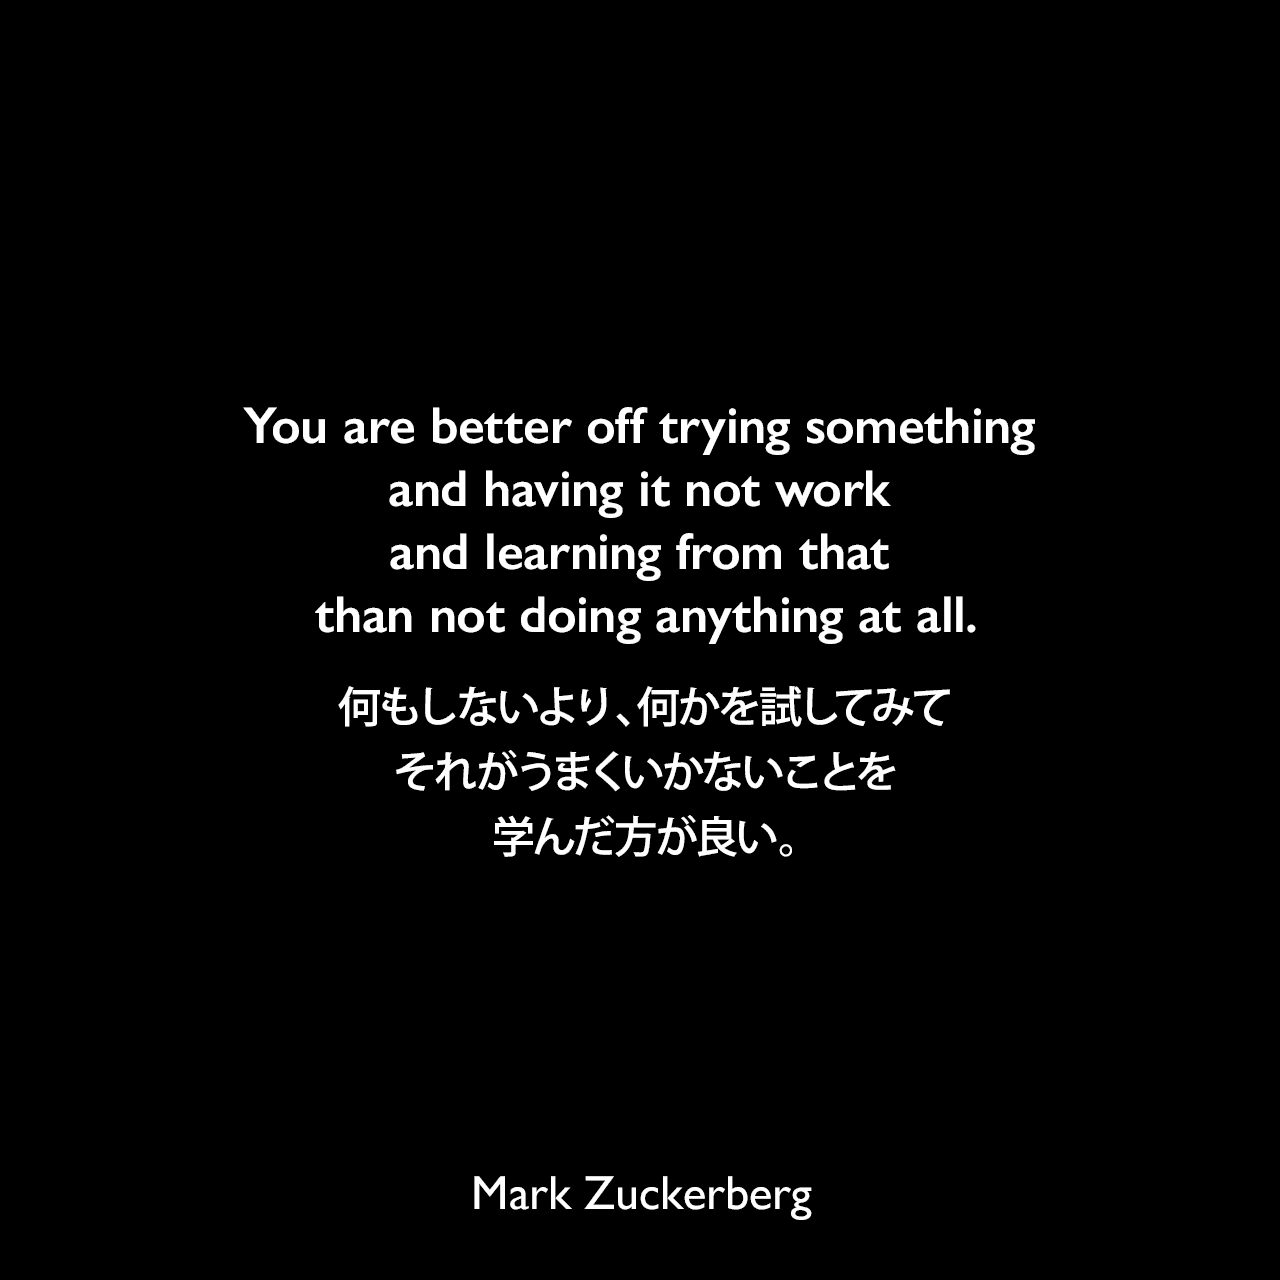 You are better off trying something and having it not work and learning from that than not doing anything at all.何もしないより、何かを試してみて、それがうまくいかないことを学んだ方が良い。Mark Zuckerberg